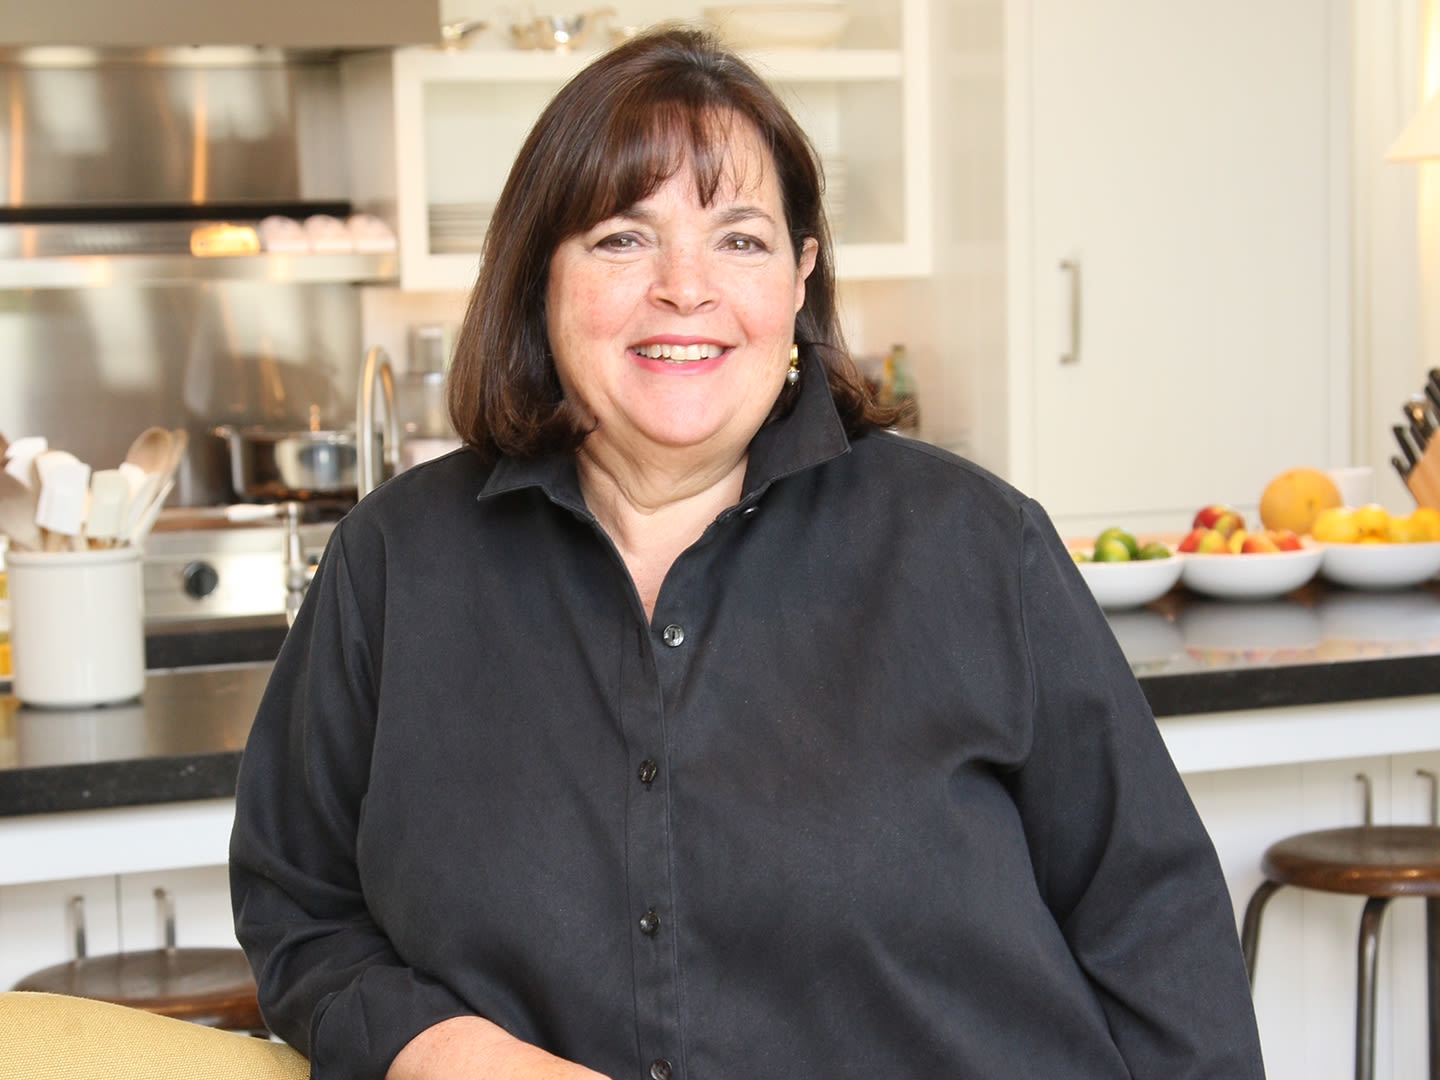 Ina Garten Just Shared the Chicken Salad Recipe She Made 'So Much' of In the '80s